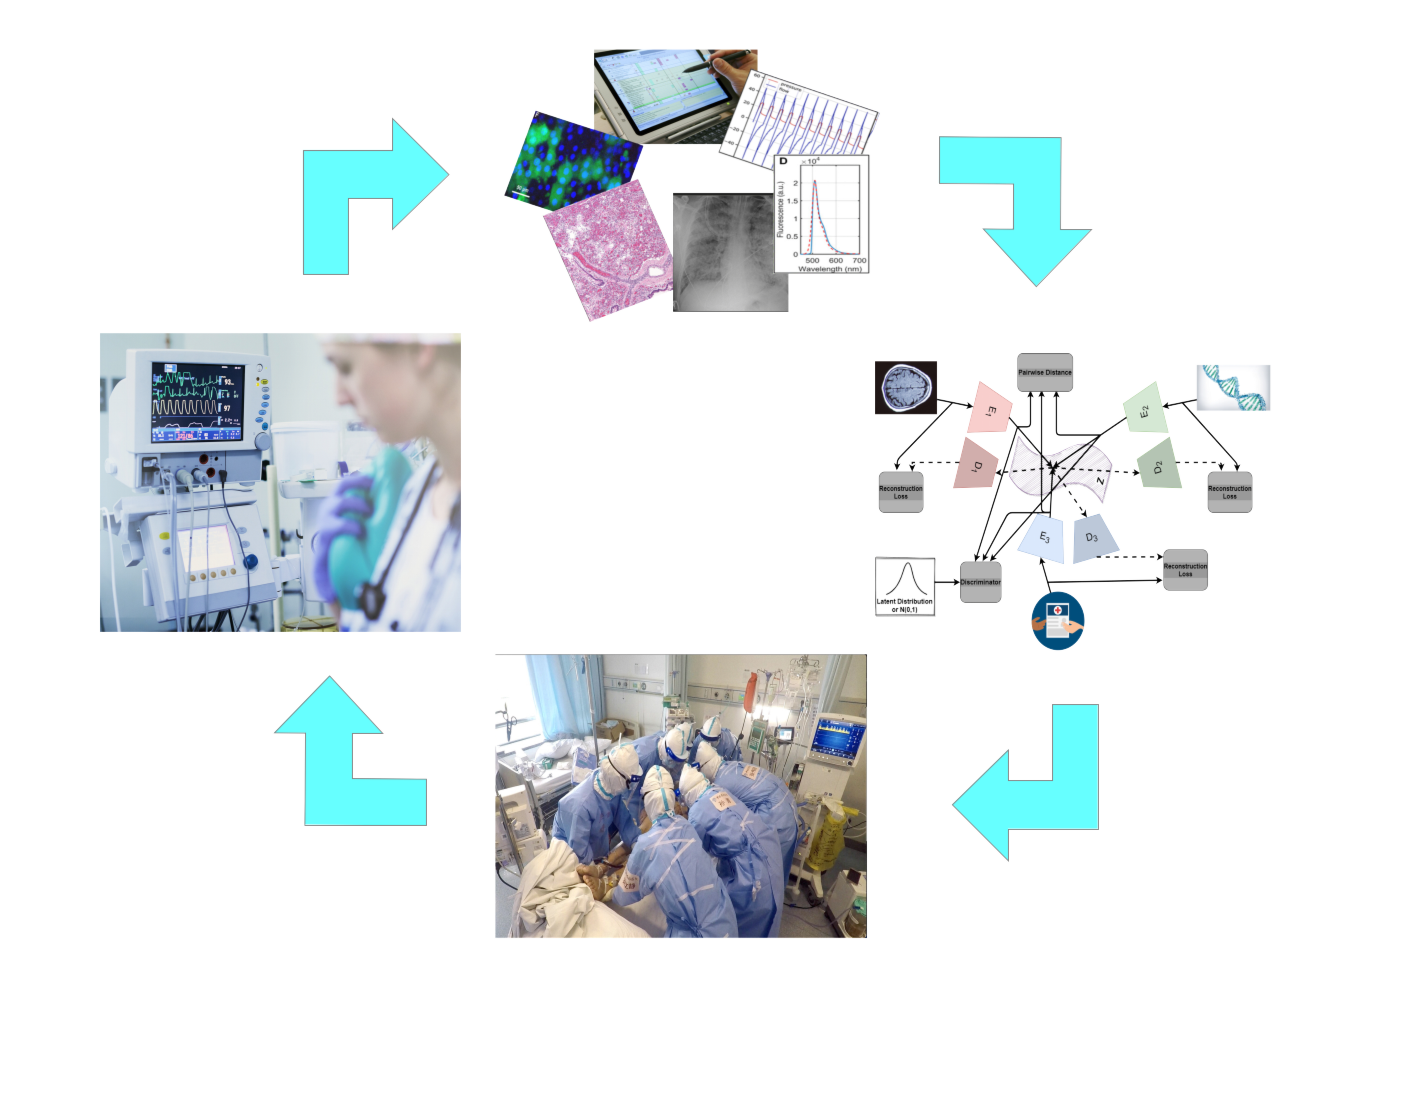 pictoral circle of how data science can integrate with activities in the icu